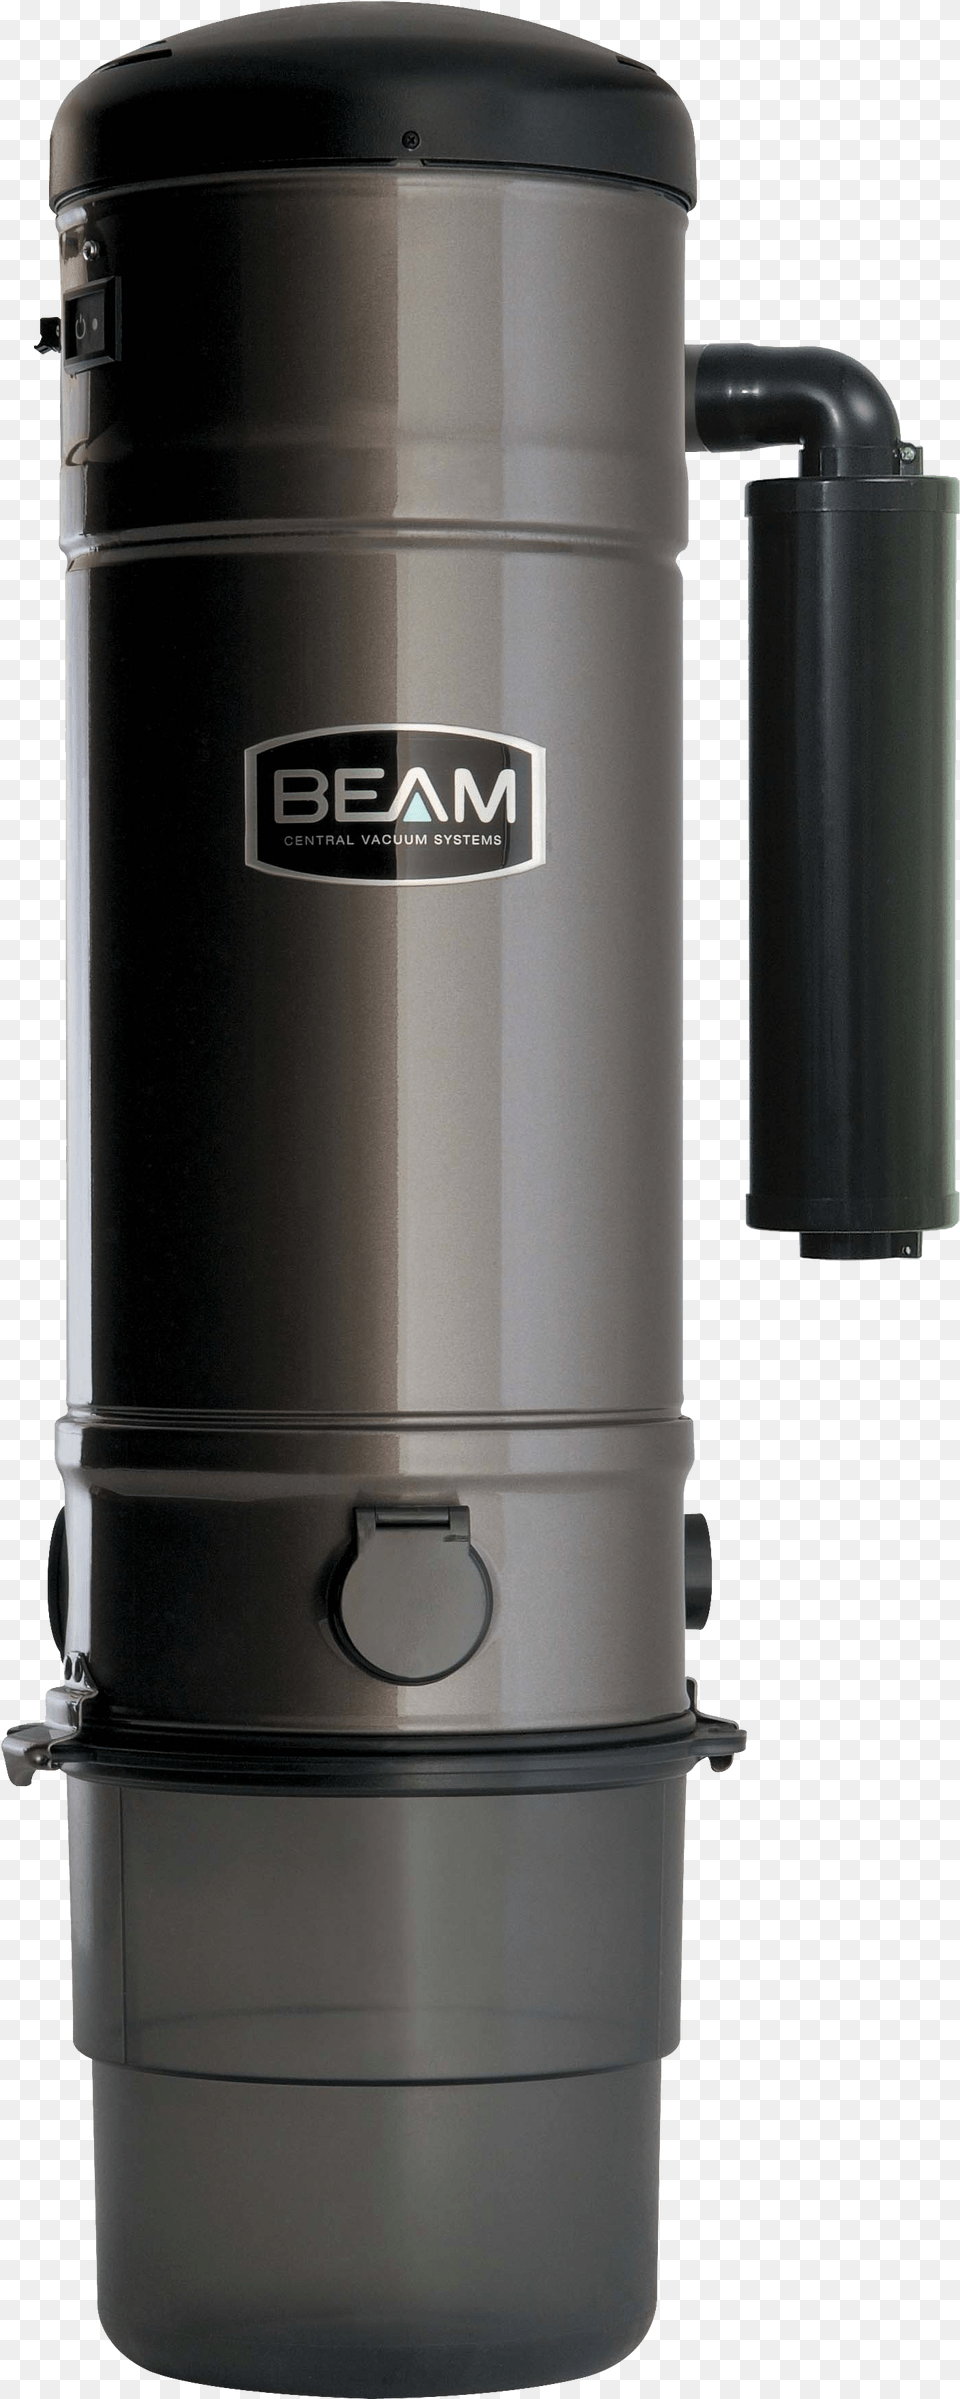 Beam Serenity Series Sc375b Best Central Vacuum System, Bottle, Shaker, Device, Appliance Free Png